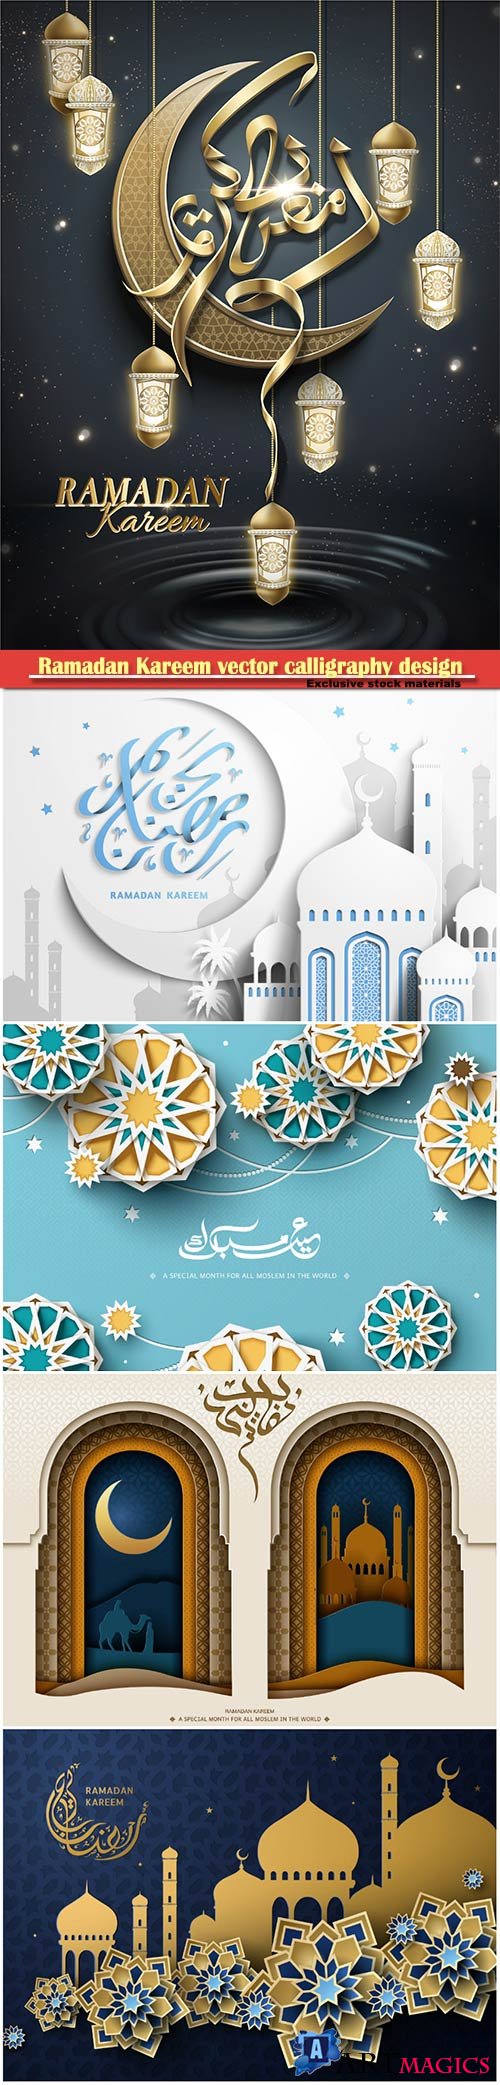 Ramadan Kareem vector calligraphy design with decorative floral pattern,mosque silhouette, crescent and glittering islamic background # 7